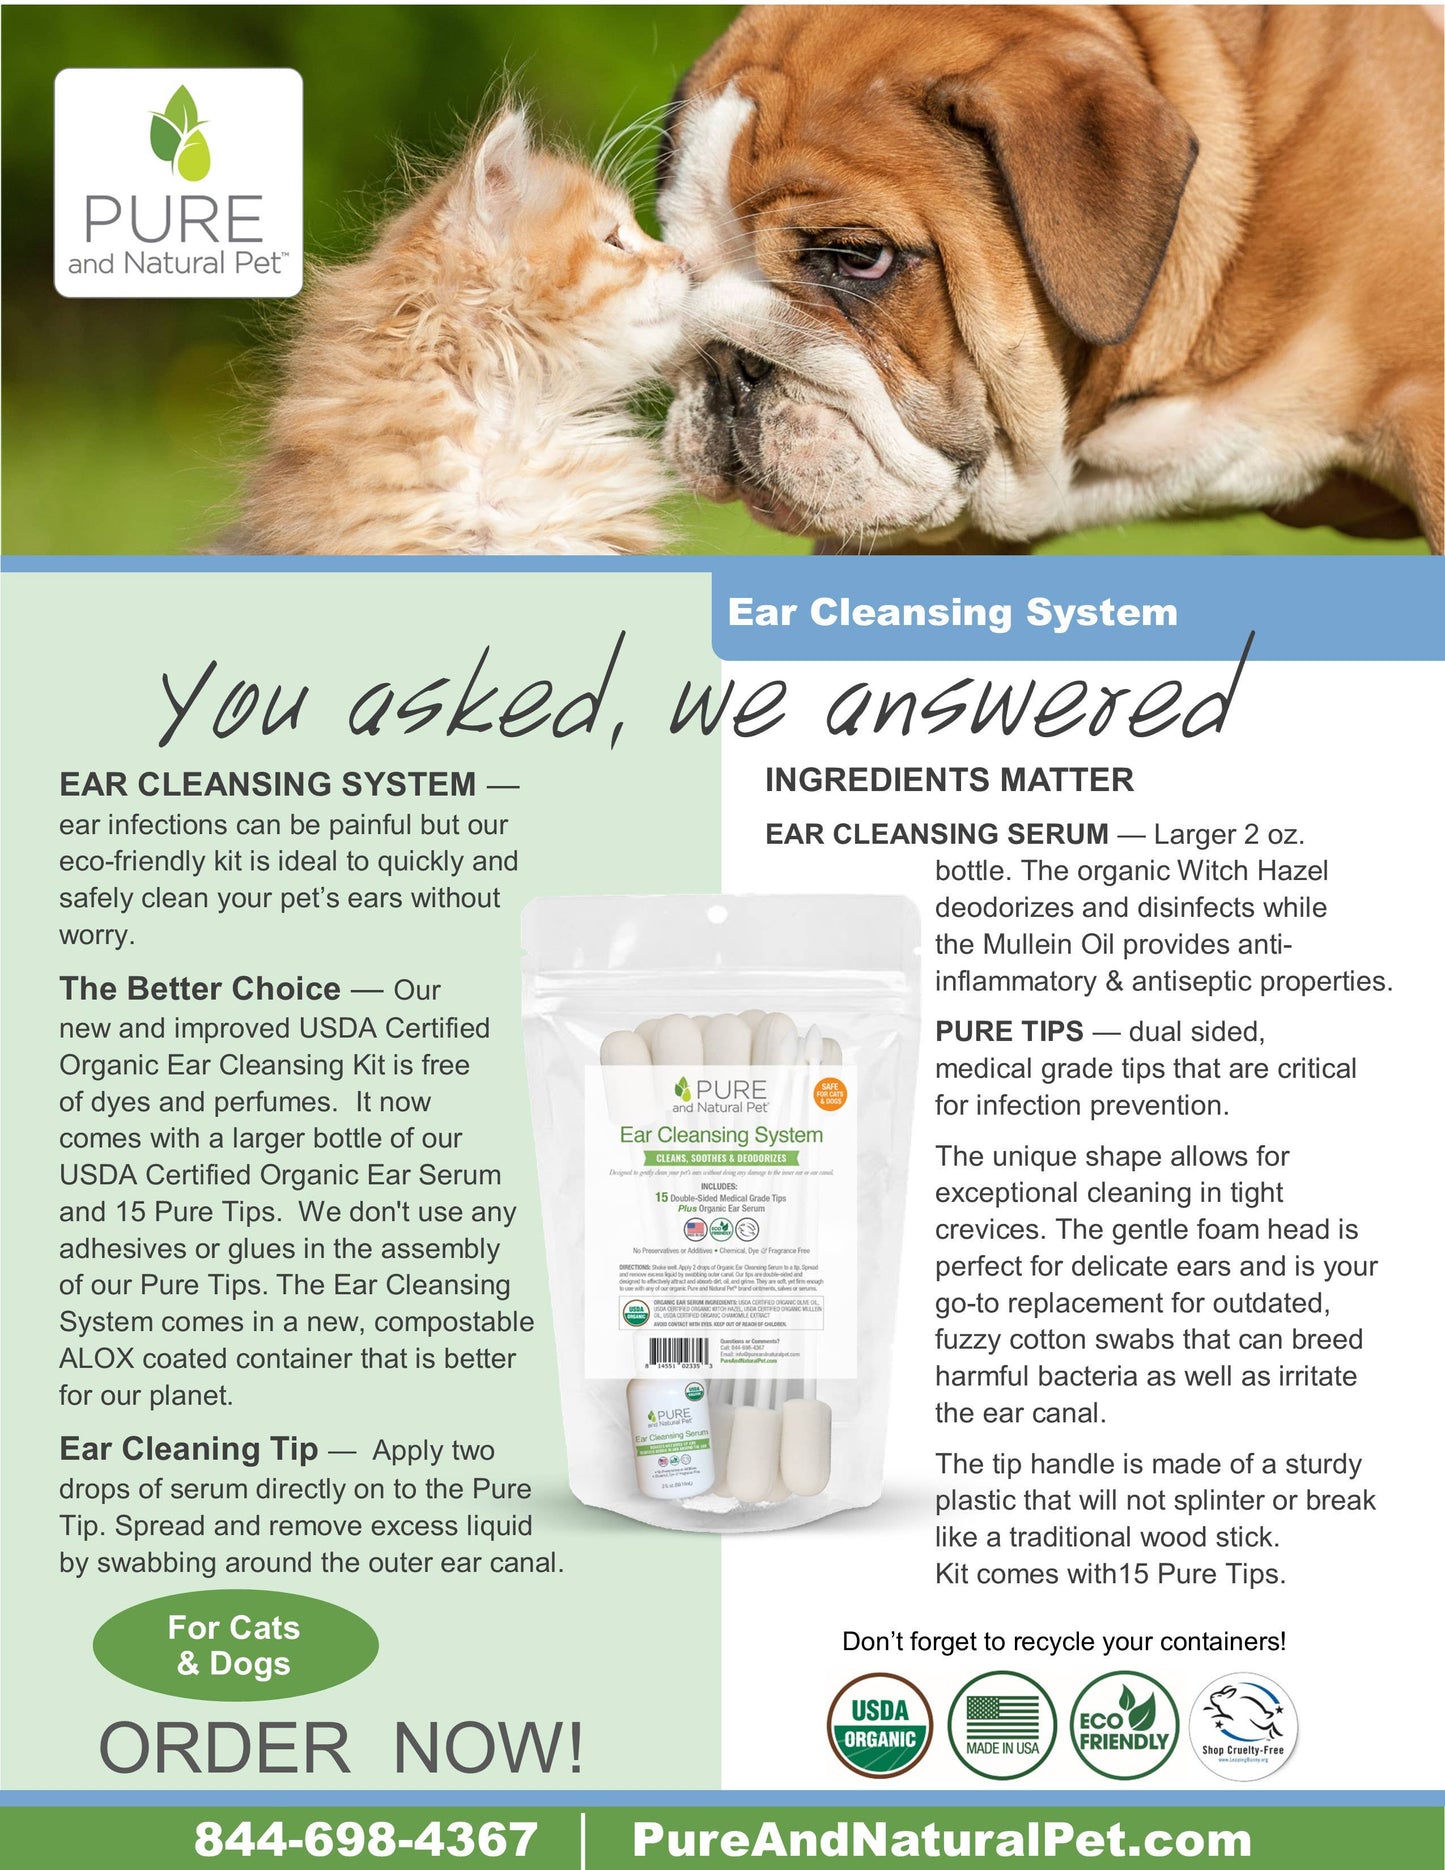 Ear Cleansing Systems (dog or cat)